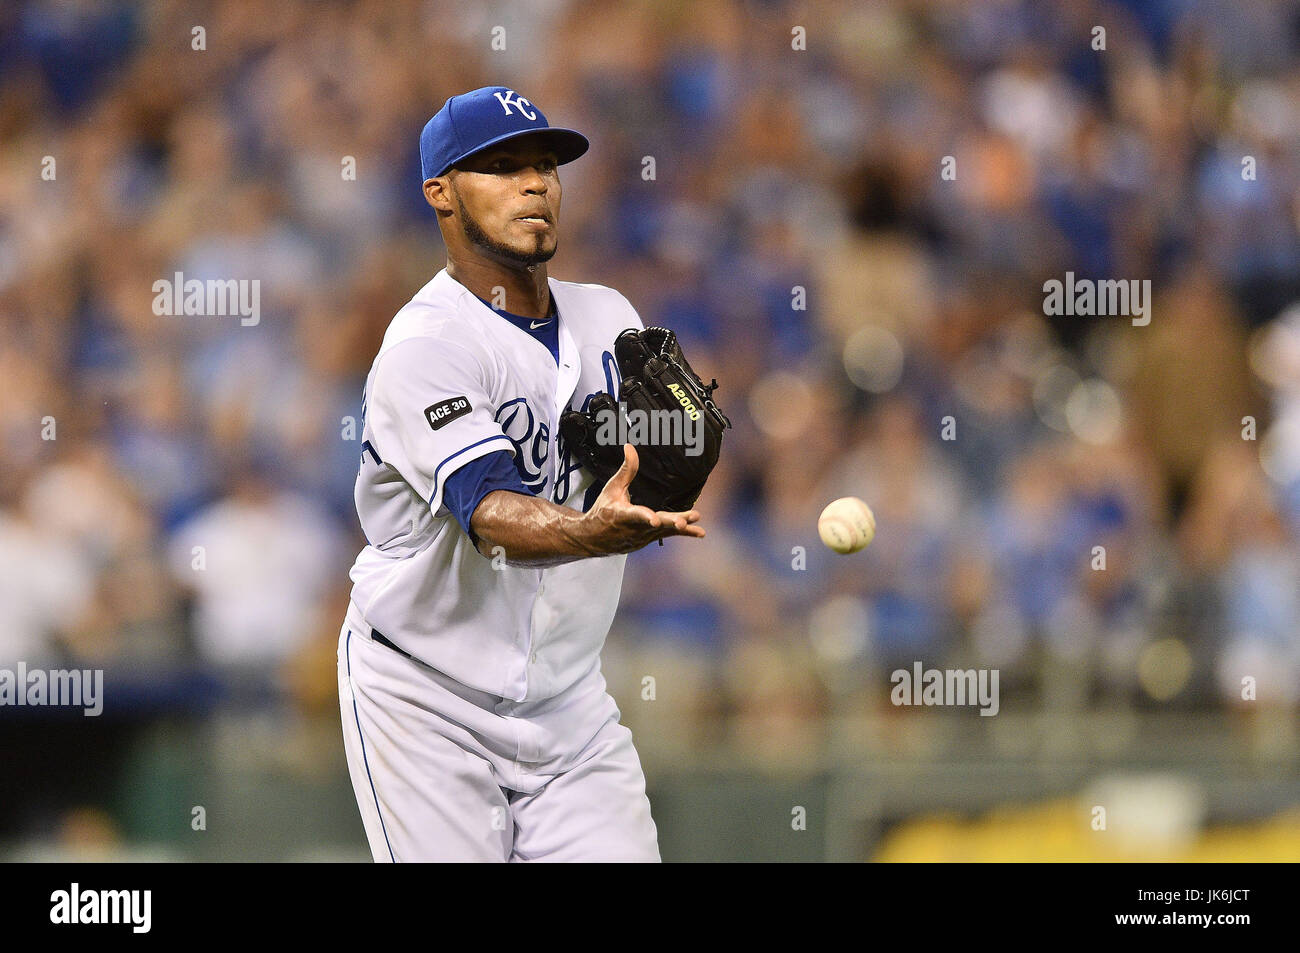 Kansas City, Missouri, USA. 22nd July, 2017. Kansas City Royals relief pitcher Al Alburquerque (62) under hands the ball for the final out of the game as the Royals defeat the White Sox 7-2 during the Major League Baseball game between the Chicago White Sox and the Kansas City Royals at Kauffman Stadium in Kansas City, Missouri. Kendall Shaw/CSM/Alamy Live News Stock Photo